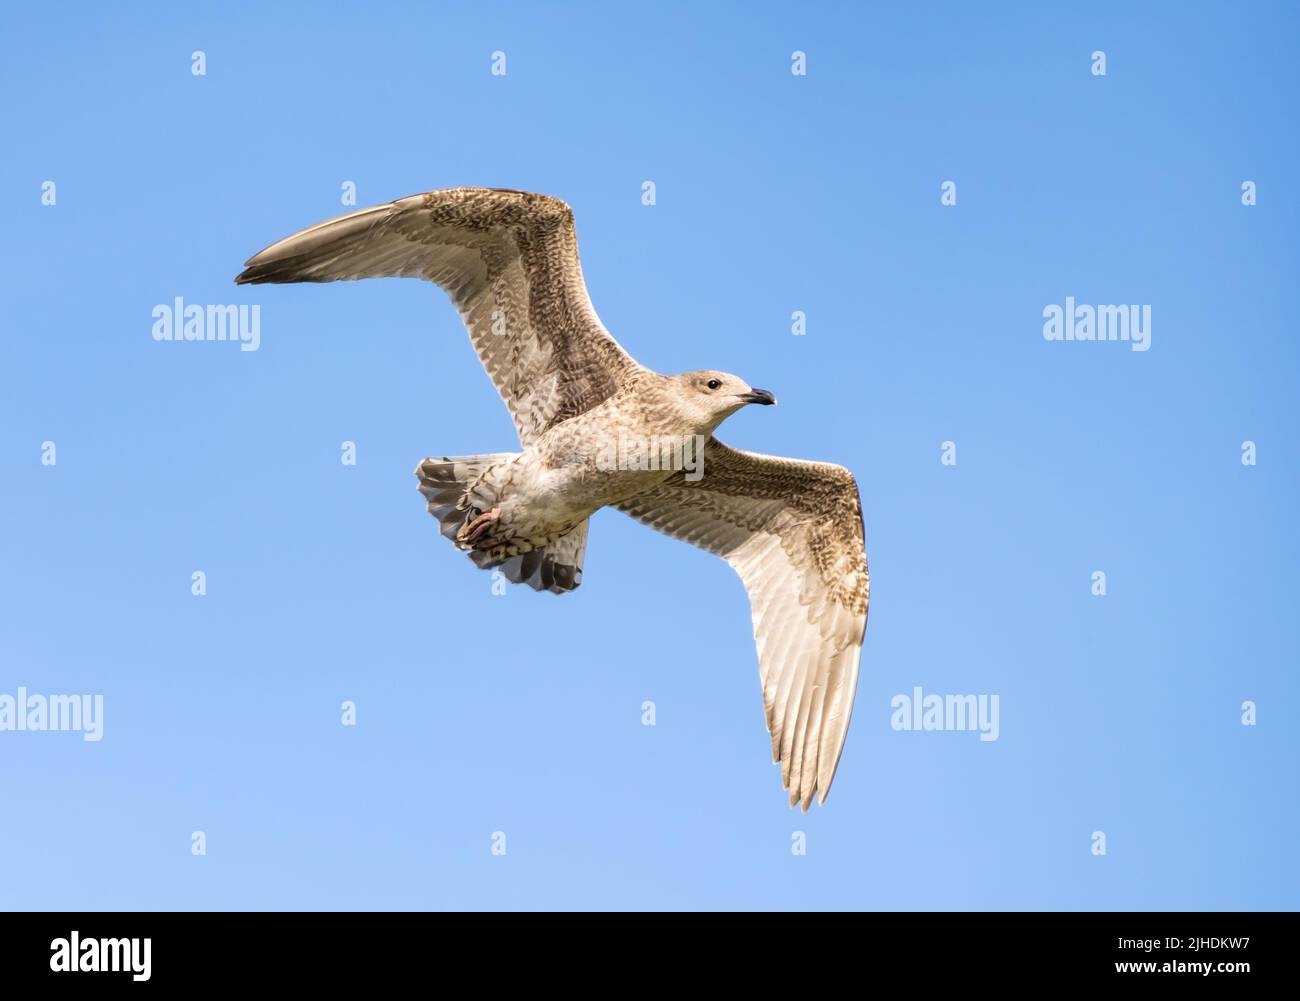 Juvenile Herring Gull (Larus argentatus) soaring, in flight, flying with wings stretched out against blue sky over a beach on a Summer day in the UK. Stock Photo